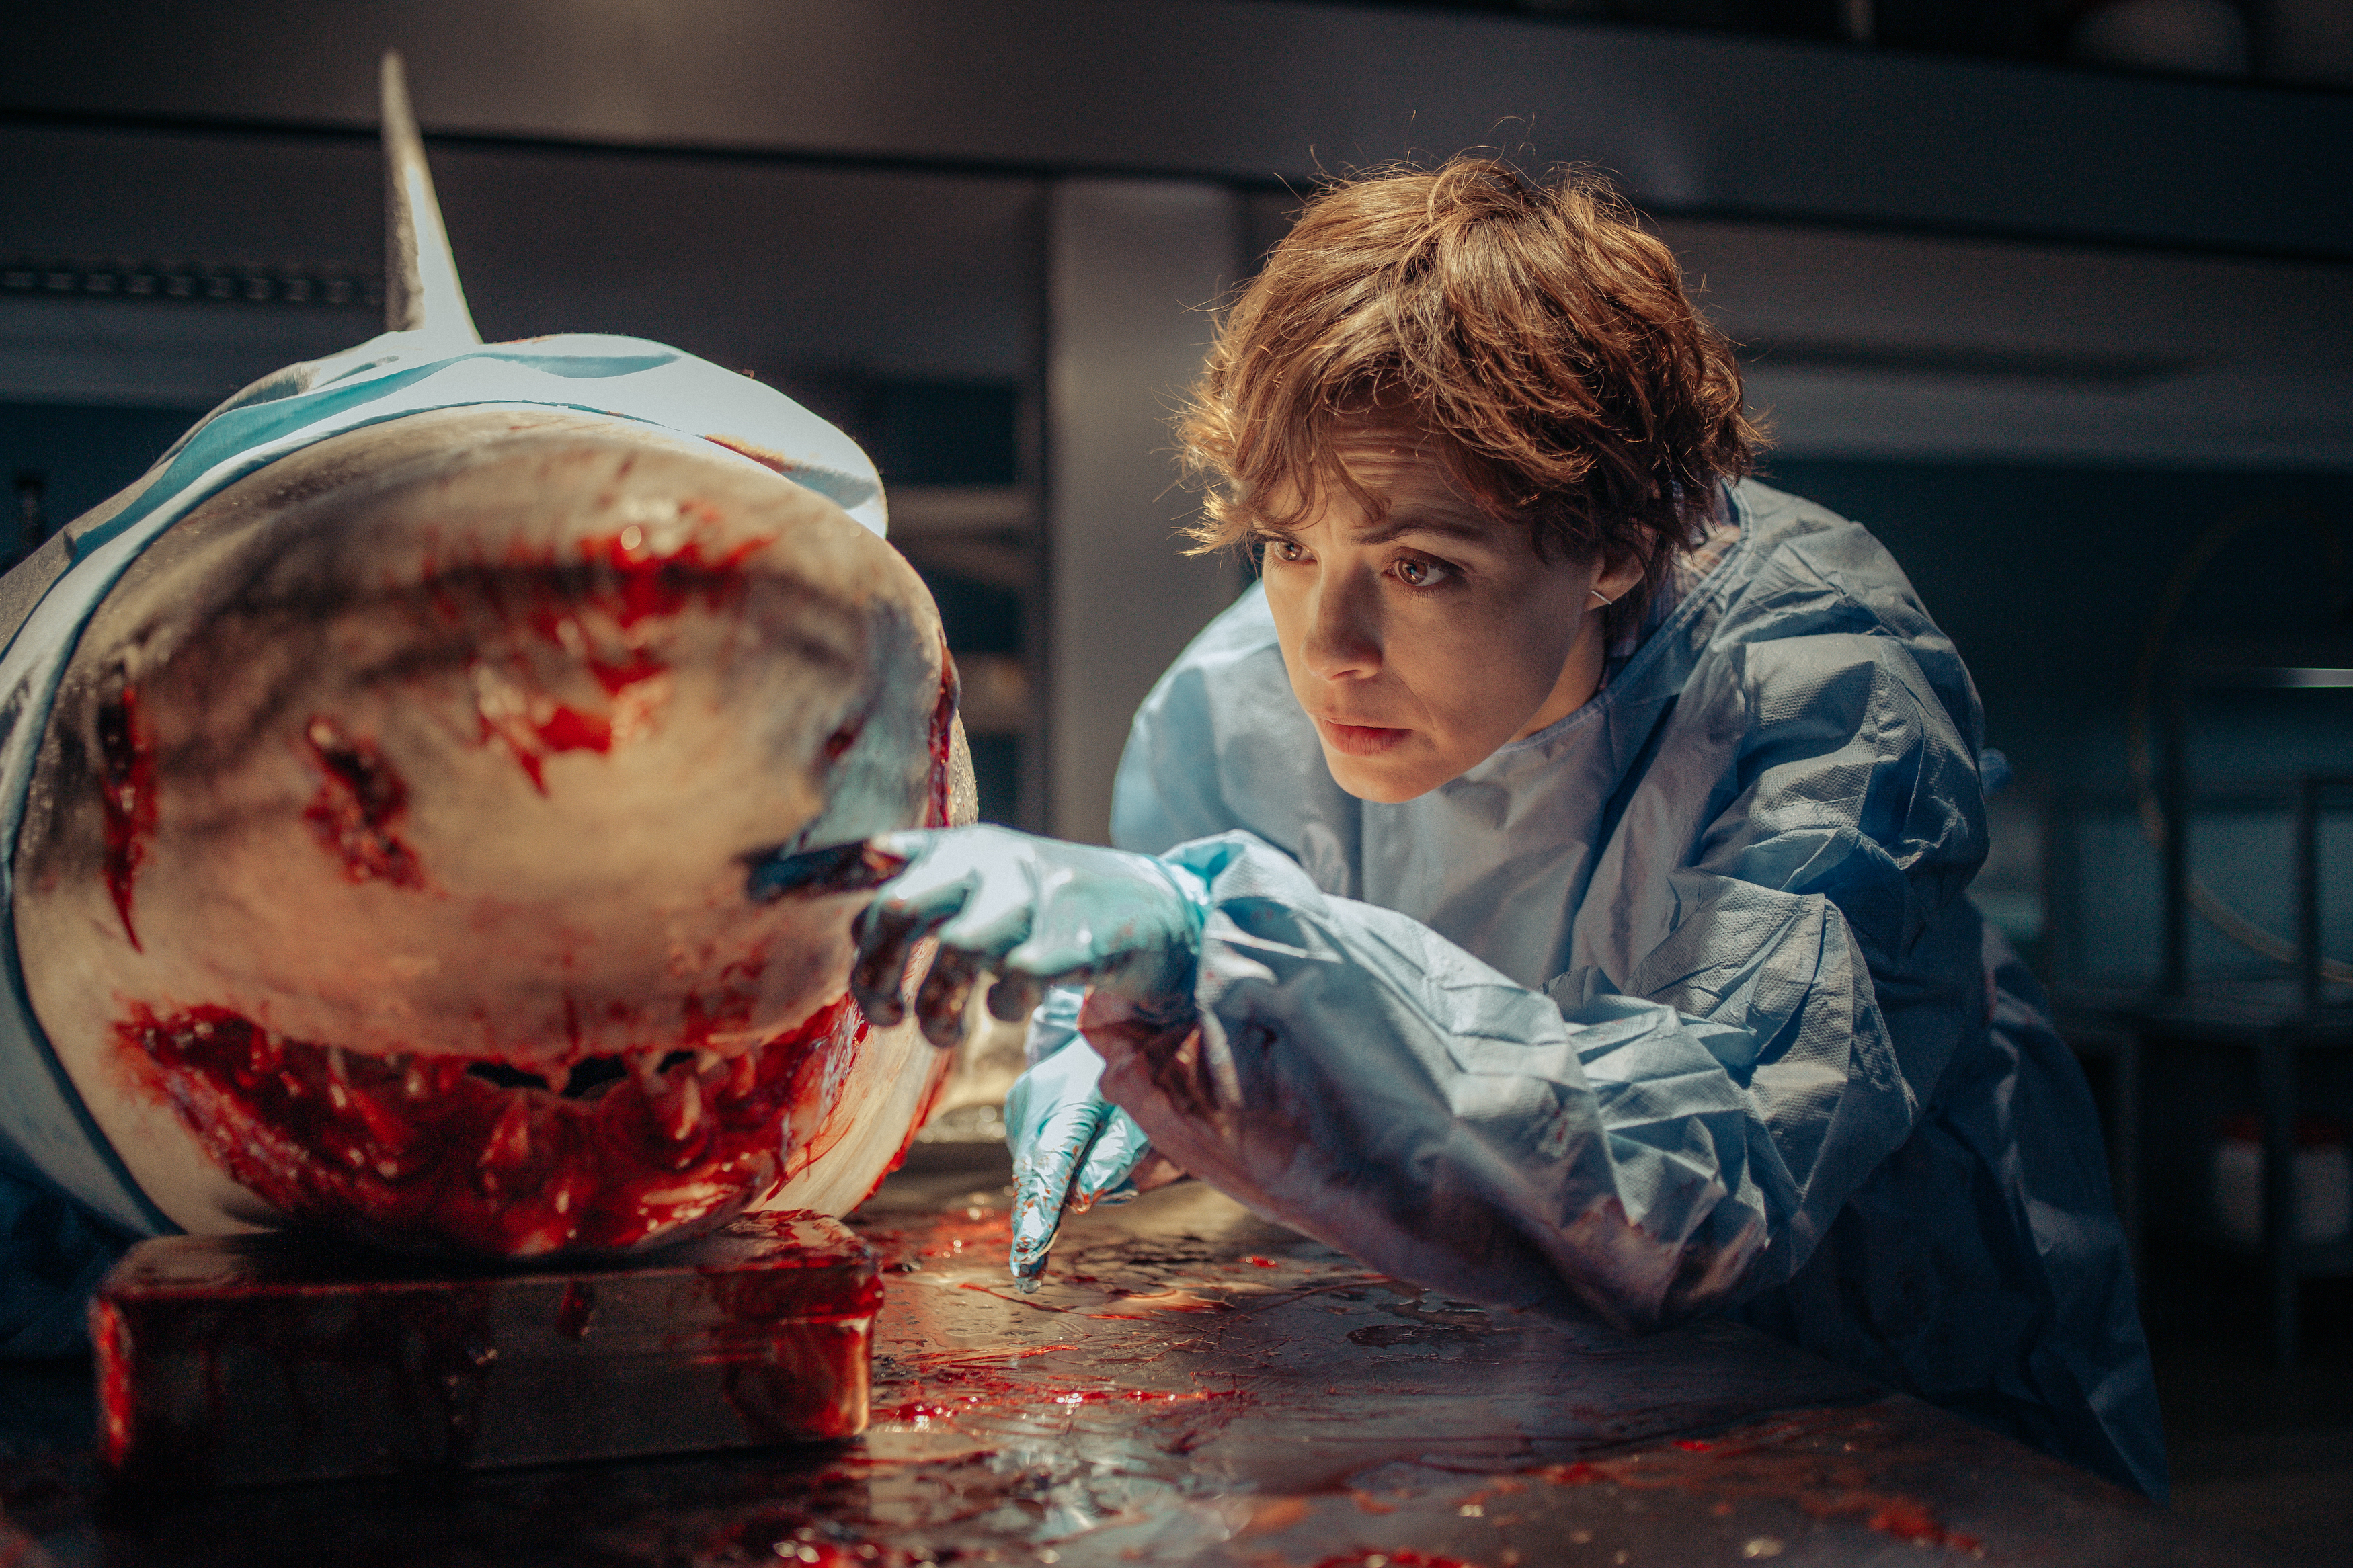 Ocean researcher Sophia (Bérénice Bejo) leans in for a close look at the bloody snout of a large shark she’s dissecting in a lab in Xavier Gens’ Netflix shark thriller Under Paris